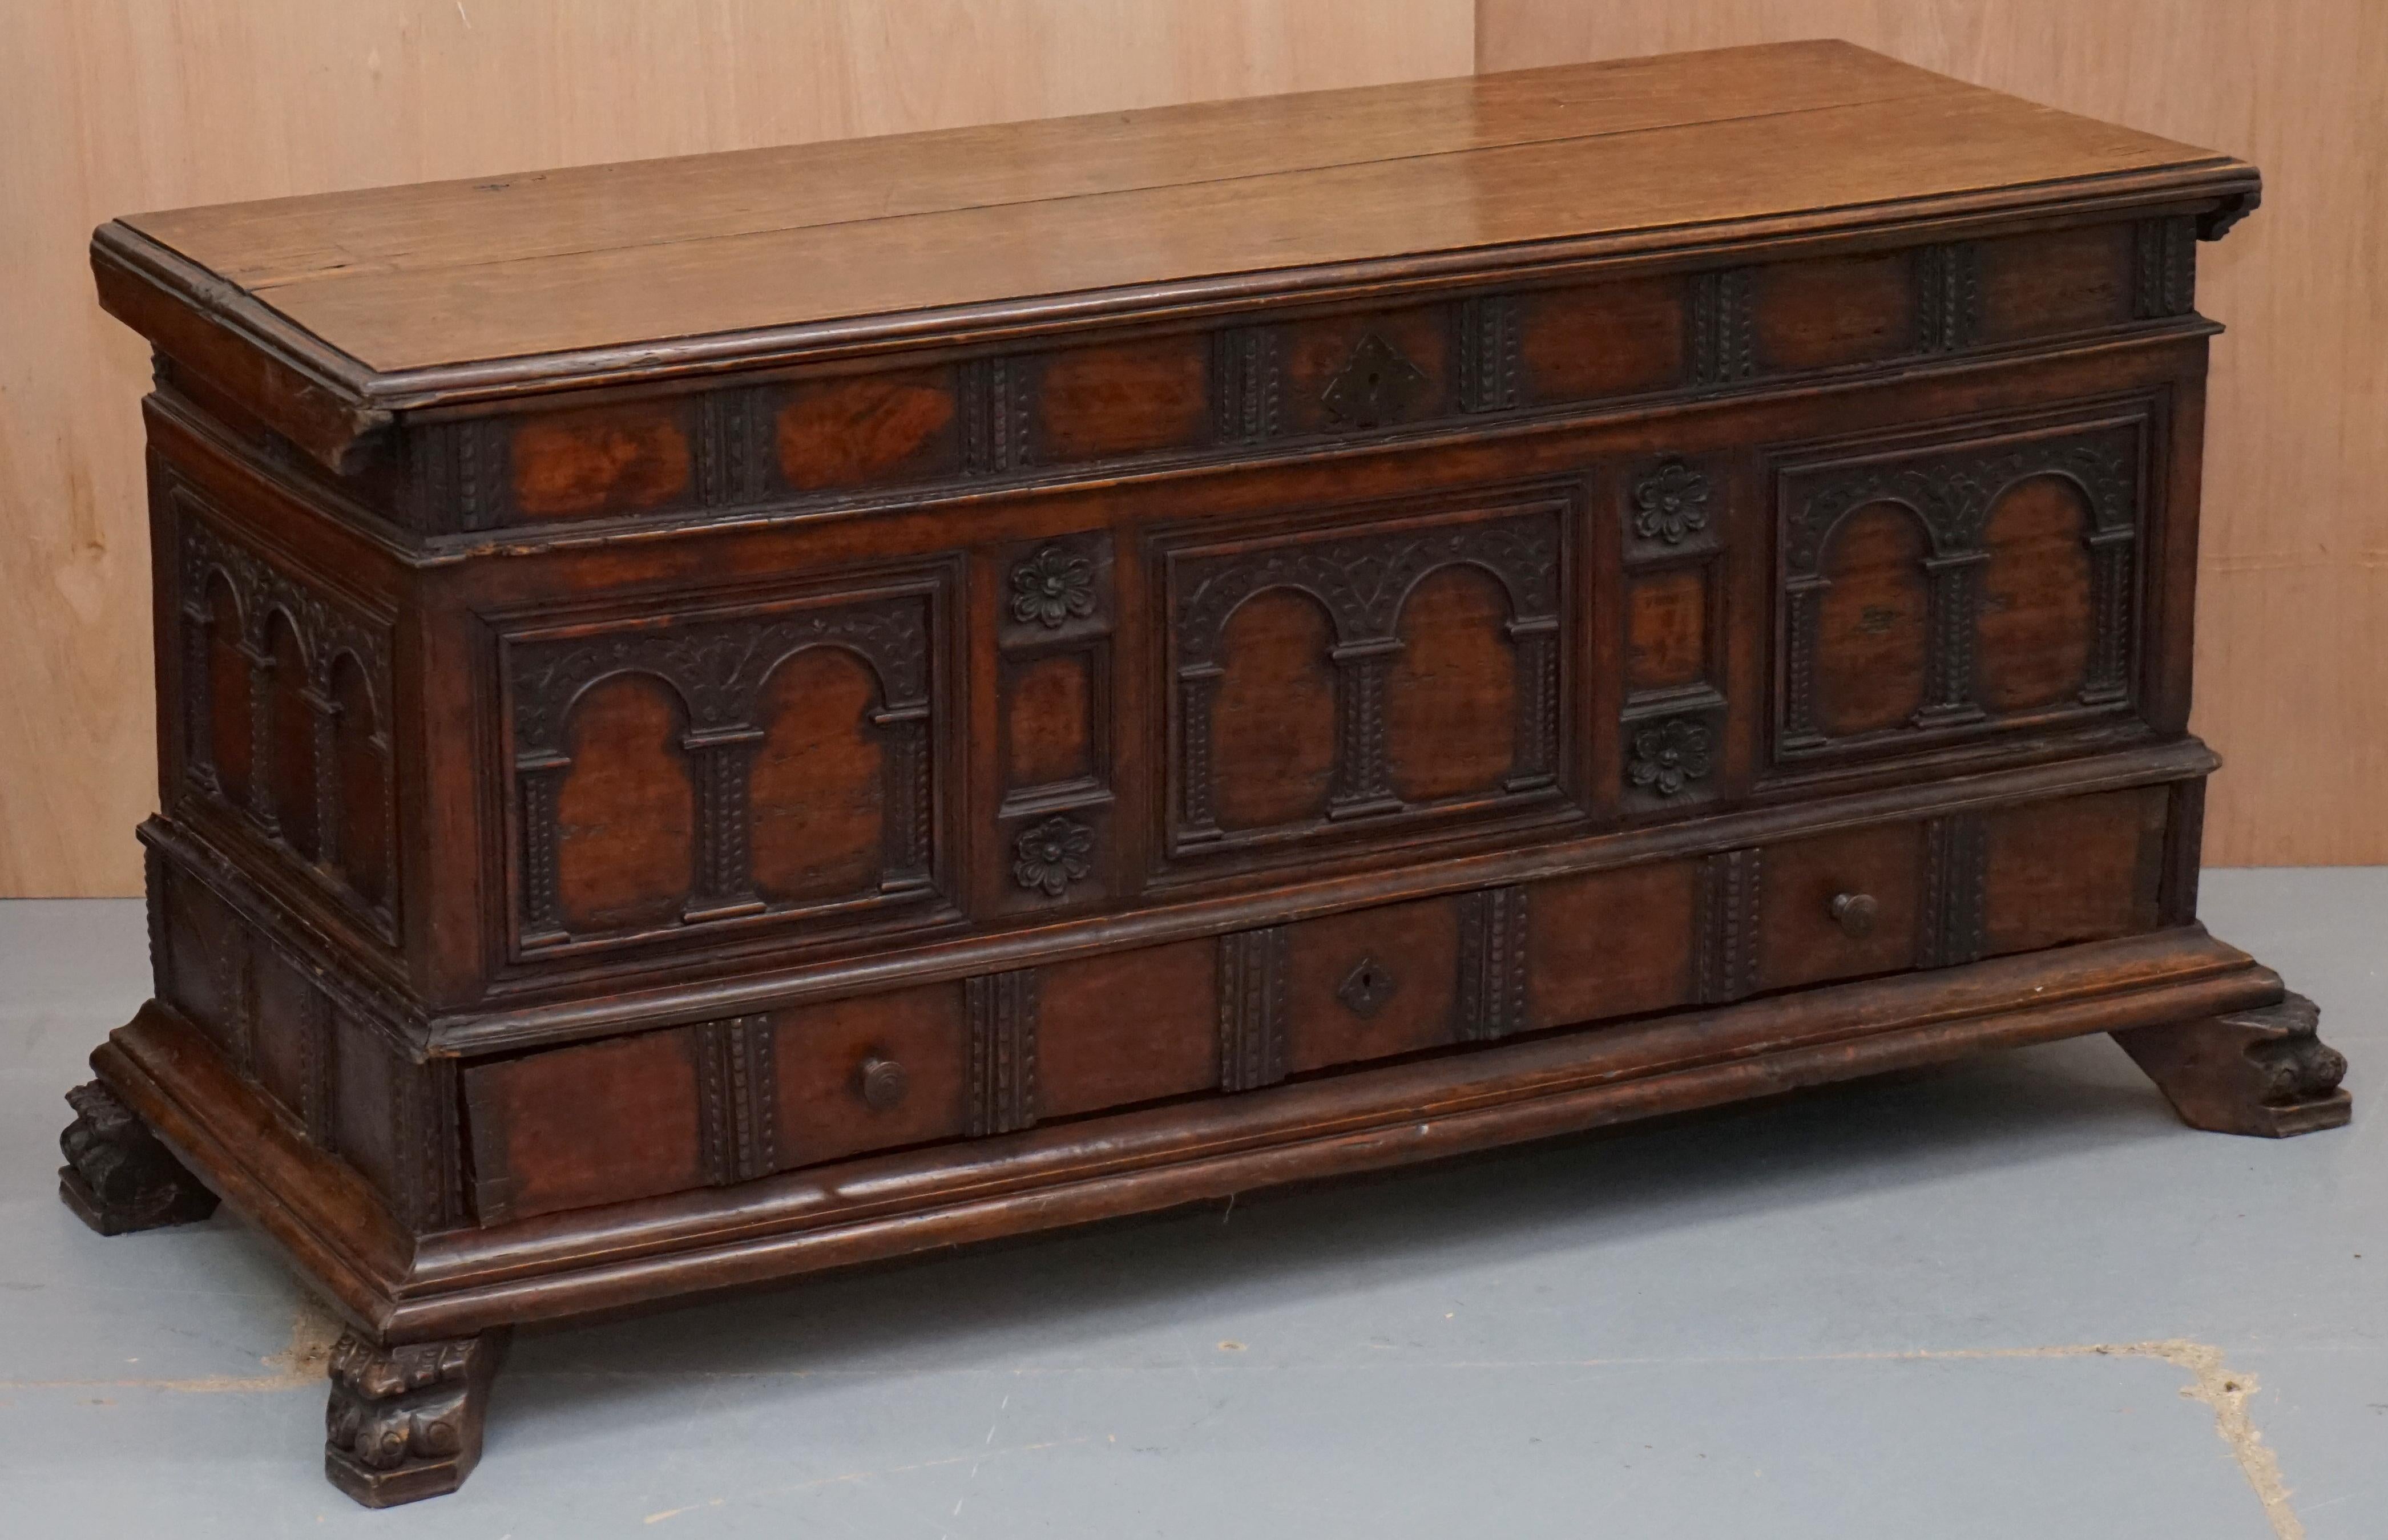 we are delighted to this very rare hand carved 18th century walnut Cassone trunk or blanket box

A very good looking and decorative piece of furniture, hand carved all-over from solid lumps of walnut. The chest sits on top of the original plinth